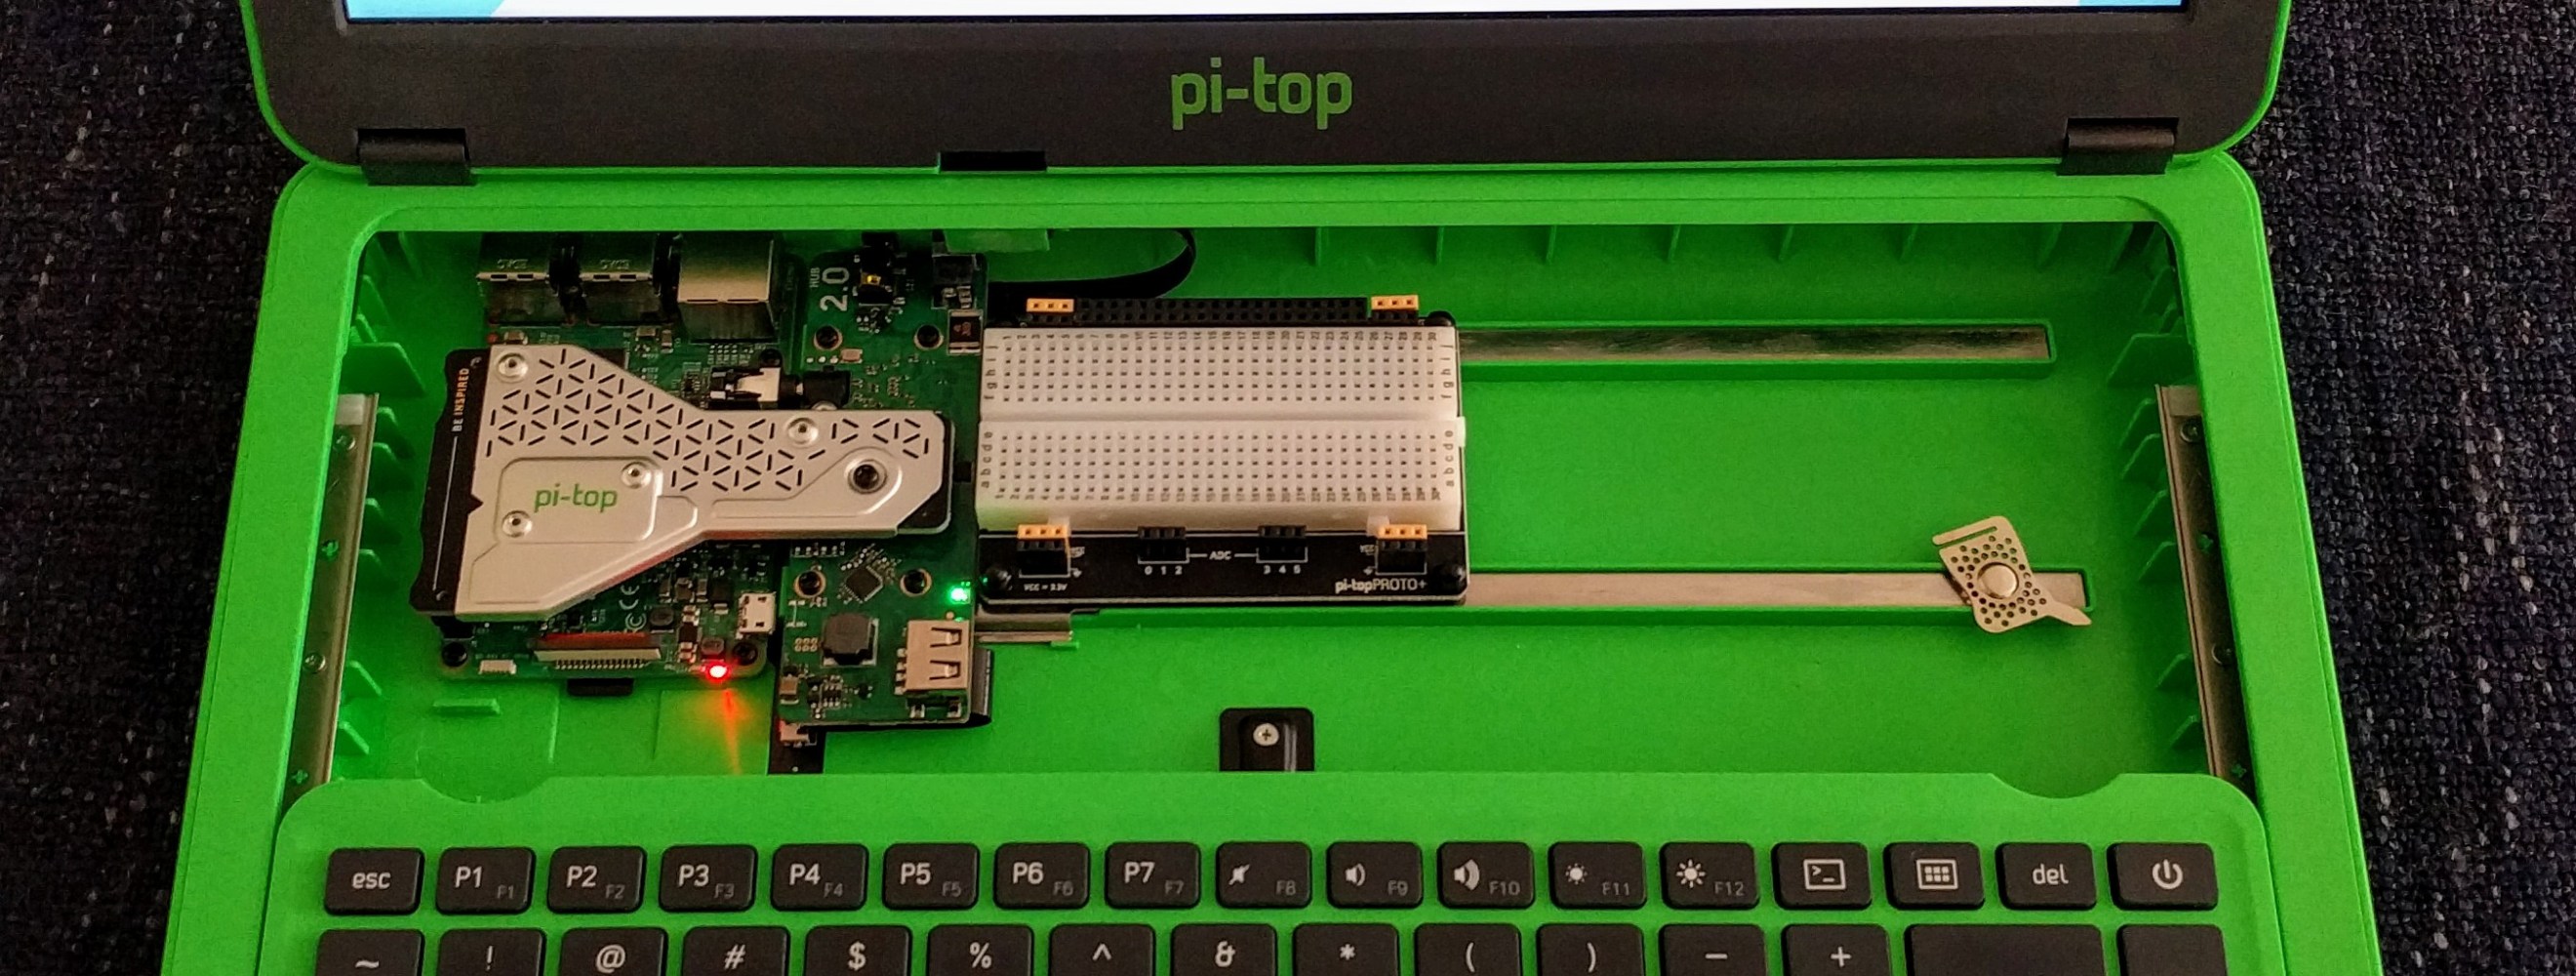 A picture of a Raspberry Pi computer inside a PiTop3 laptop